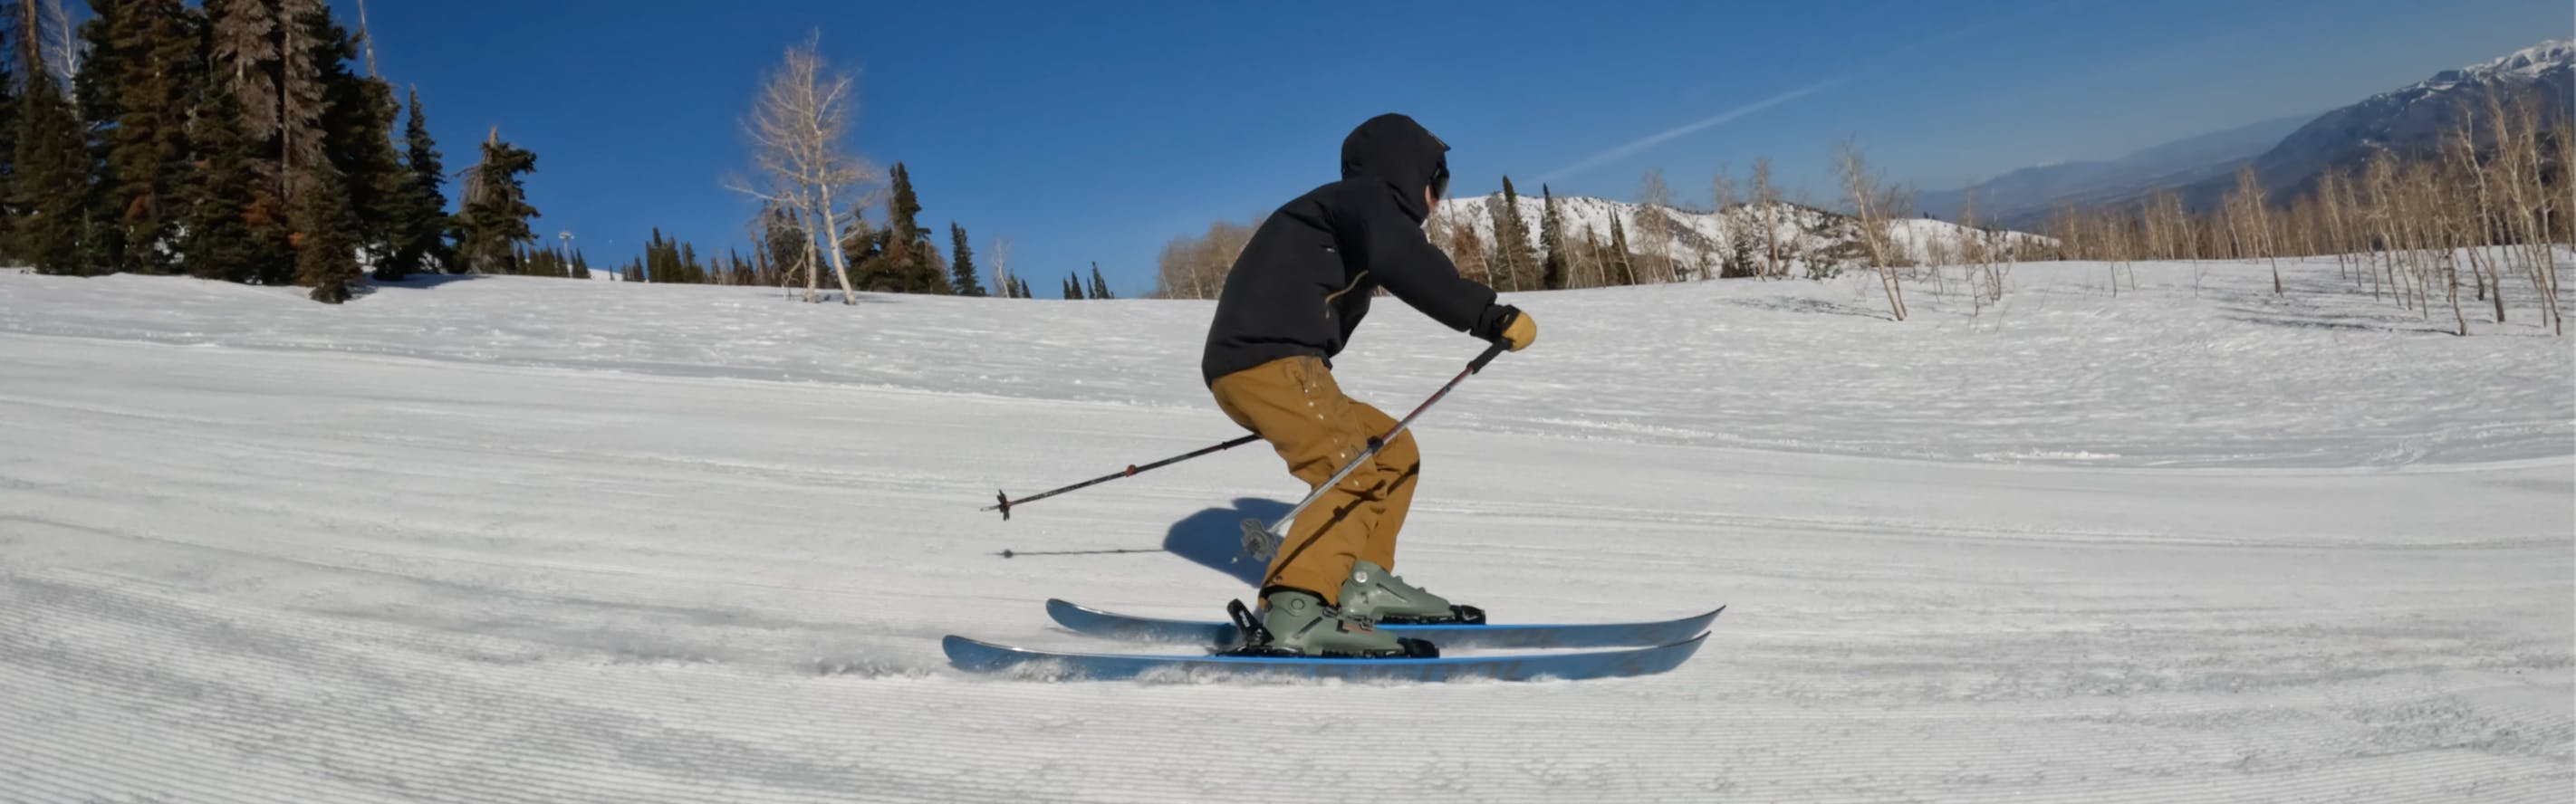 A skier turning on the 2023 Rossignol Blackops 98 Skis.